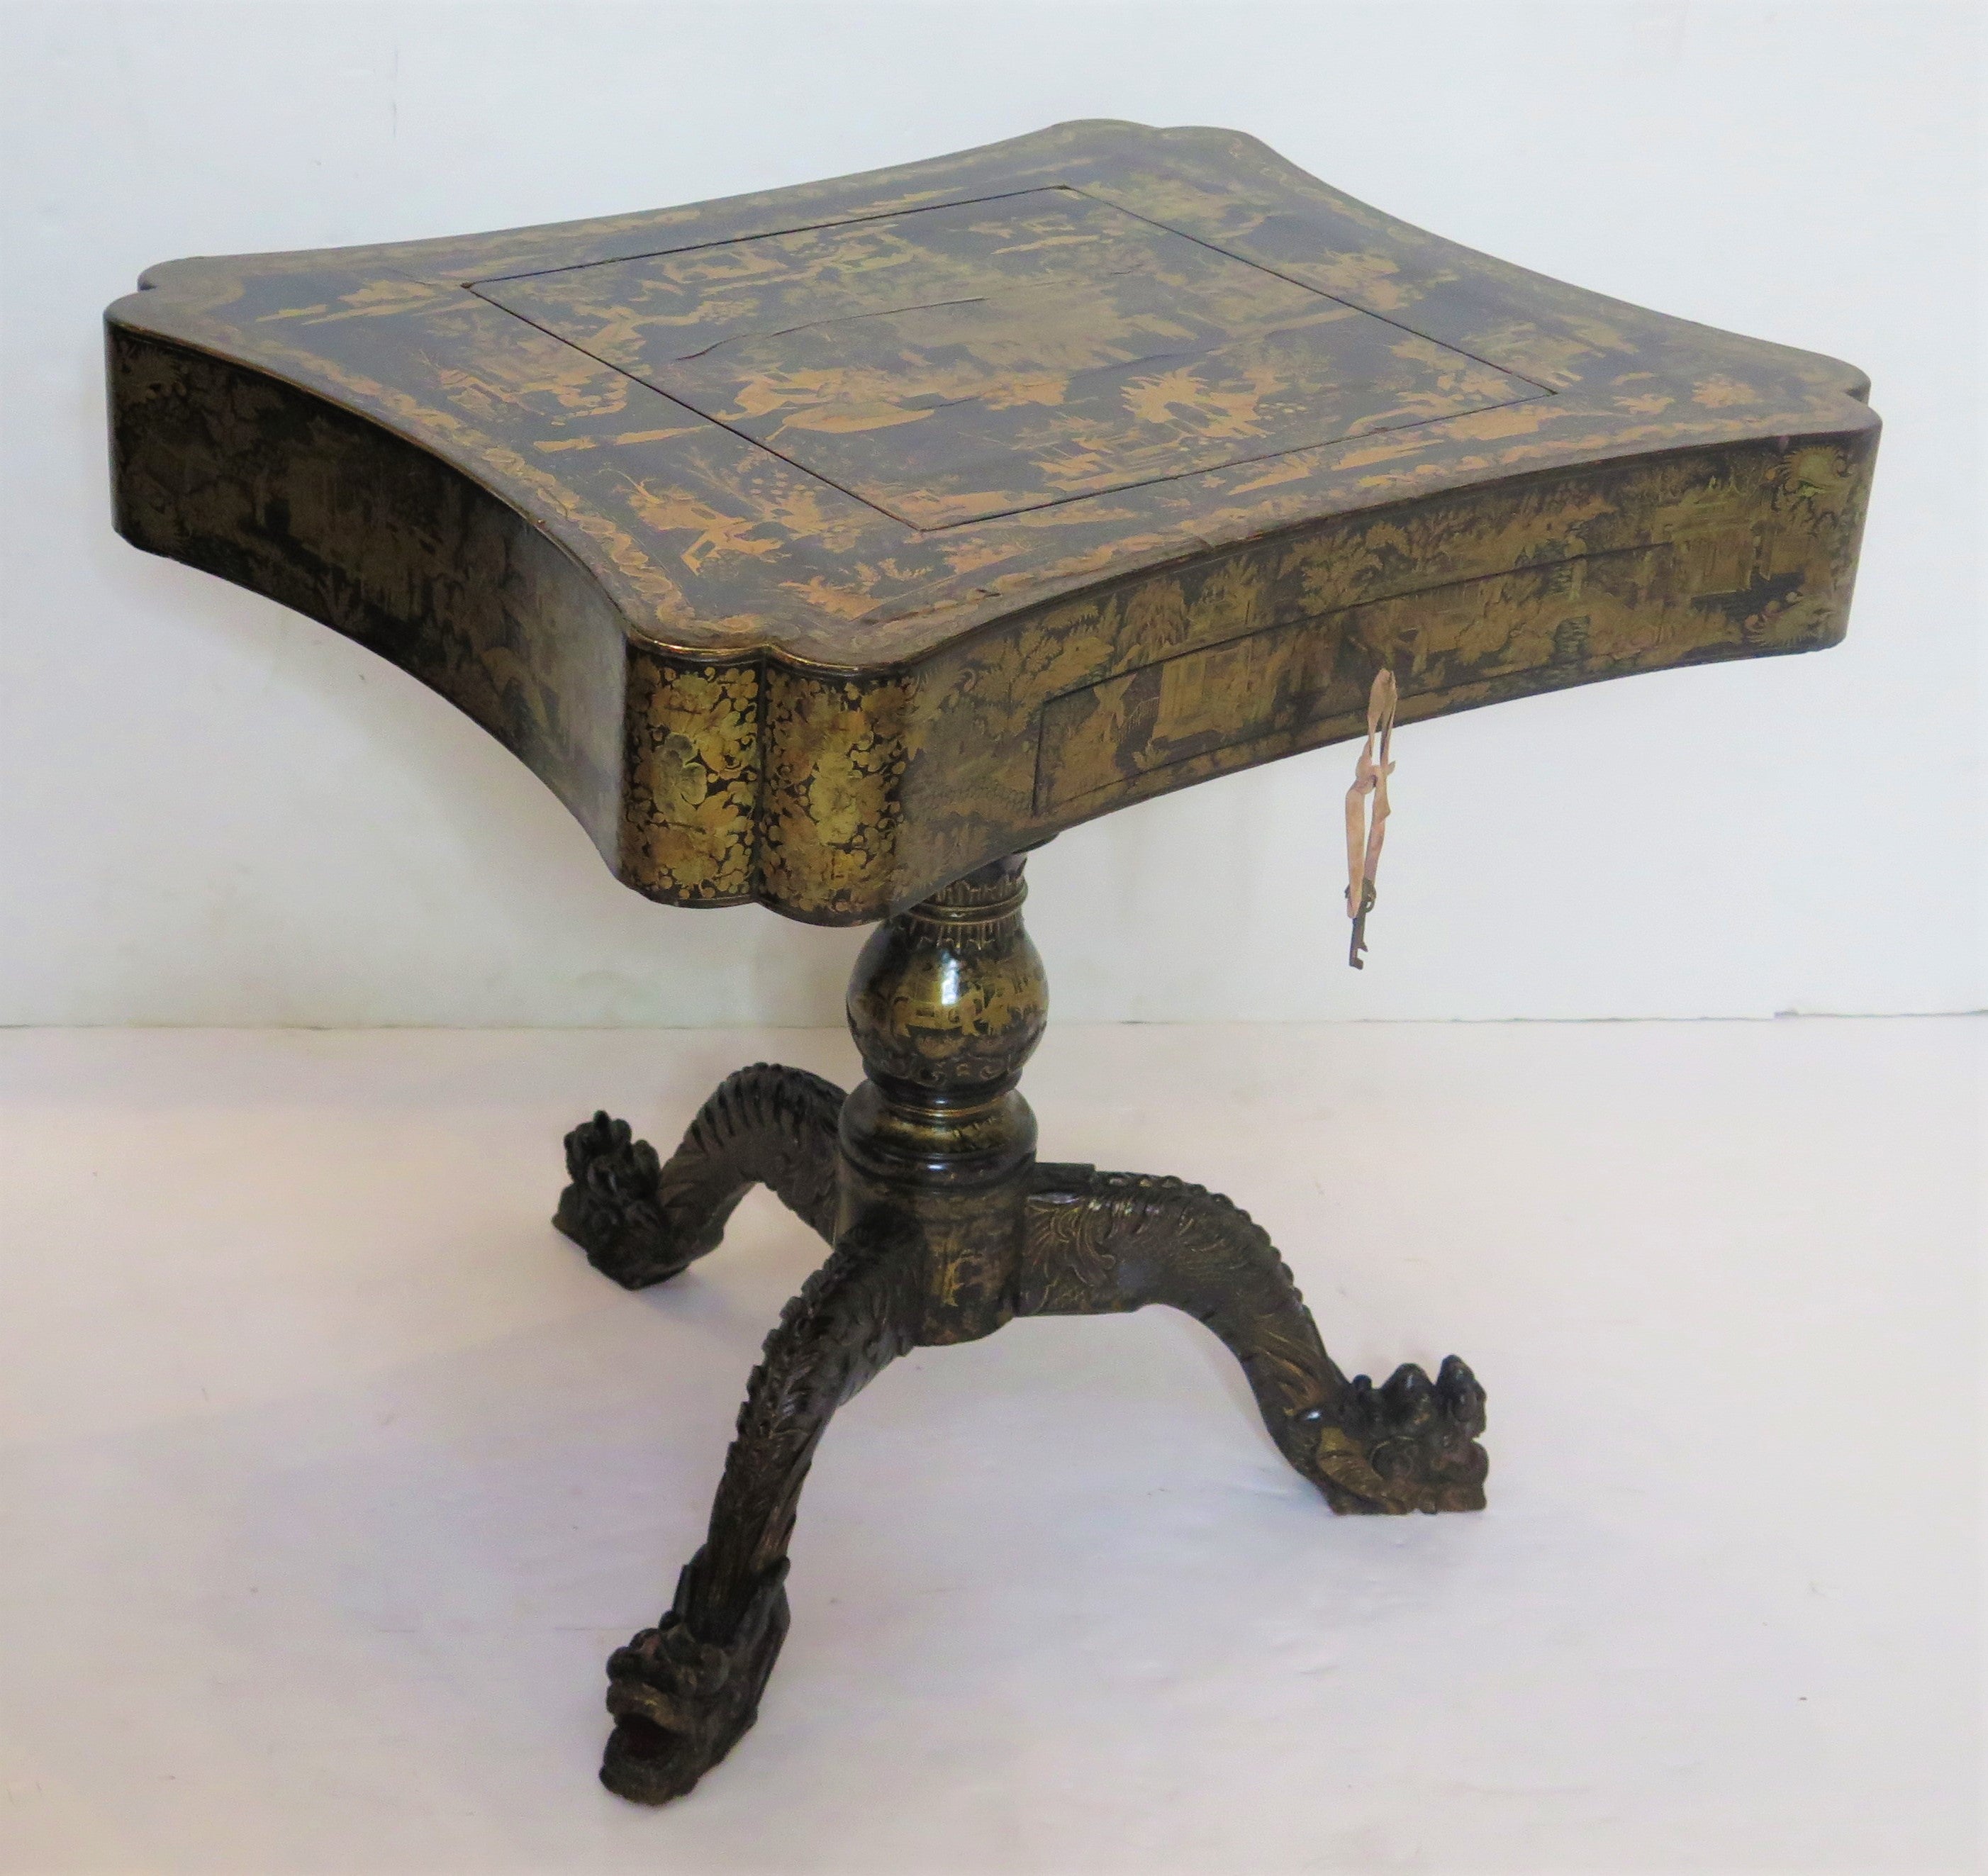 A Very Fine Chinese Export Black Lacquer and Gilt Games Table